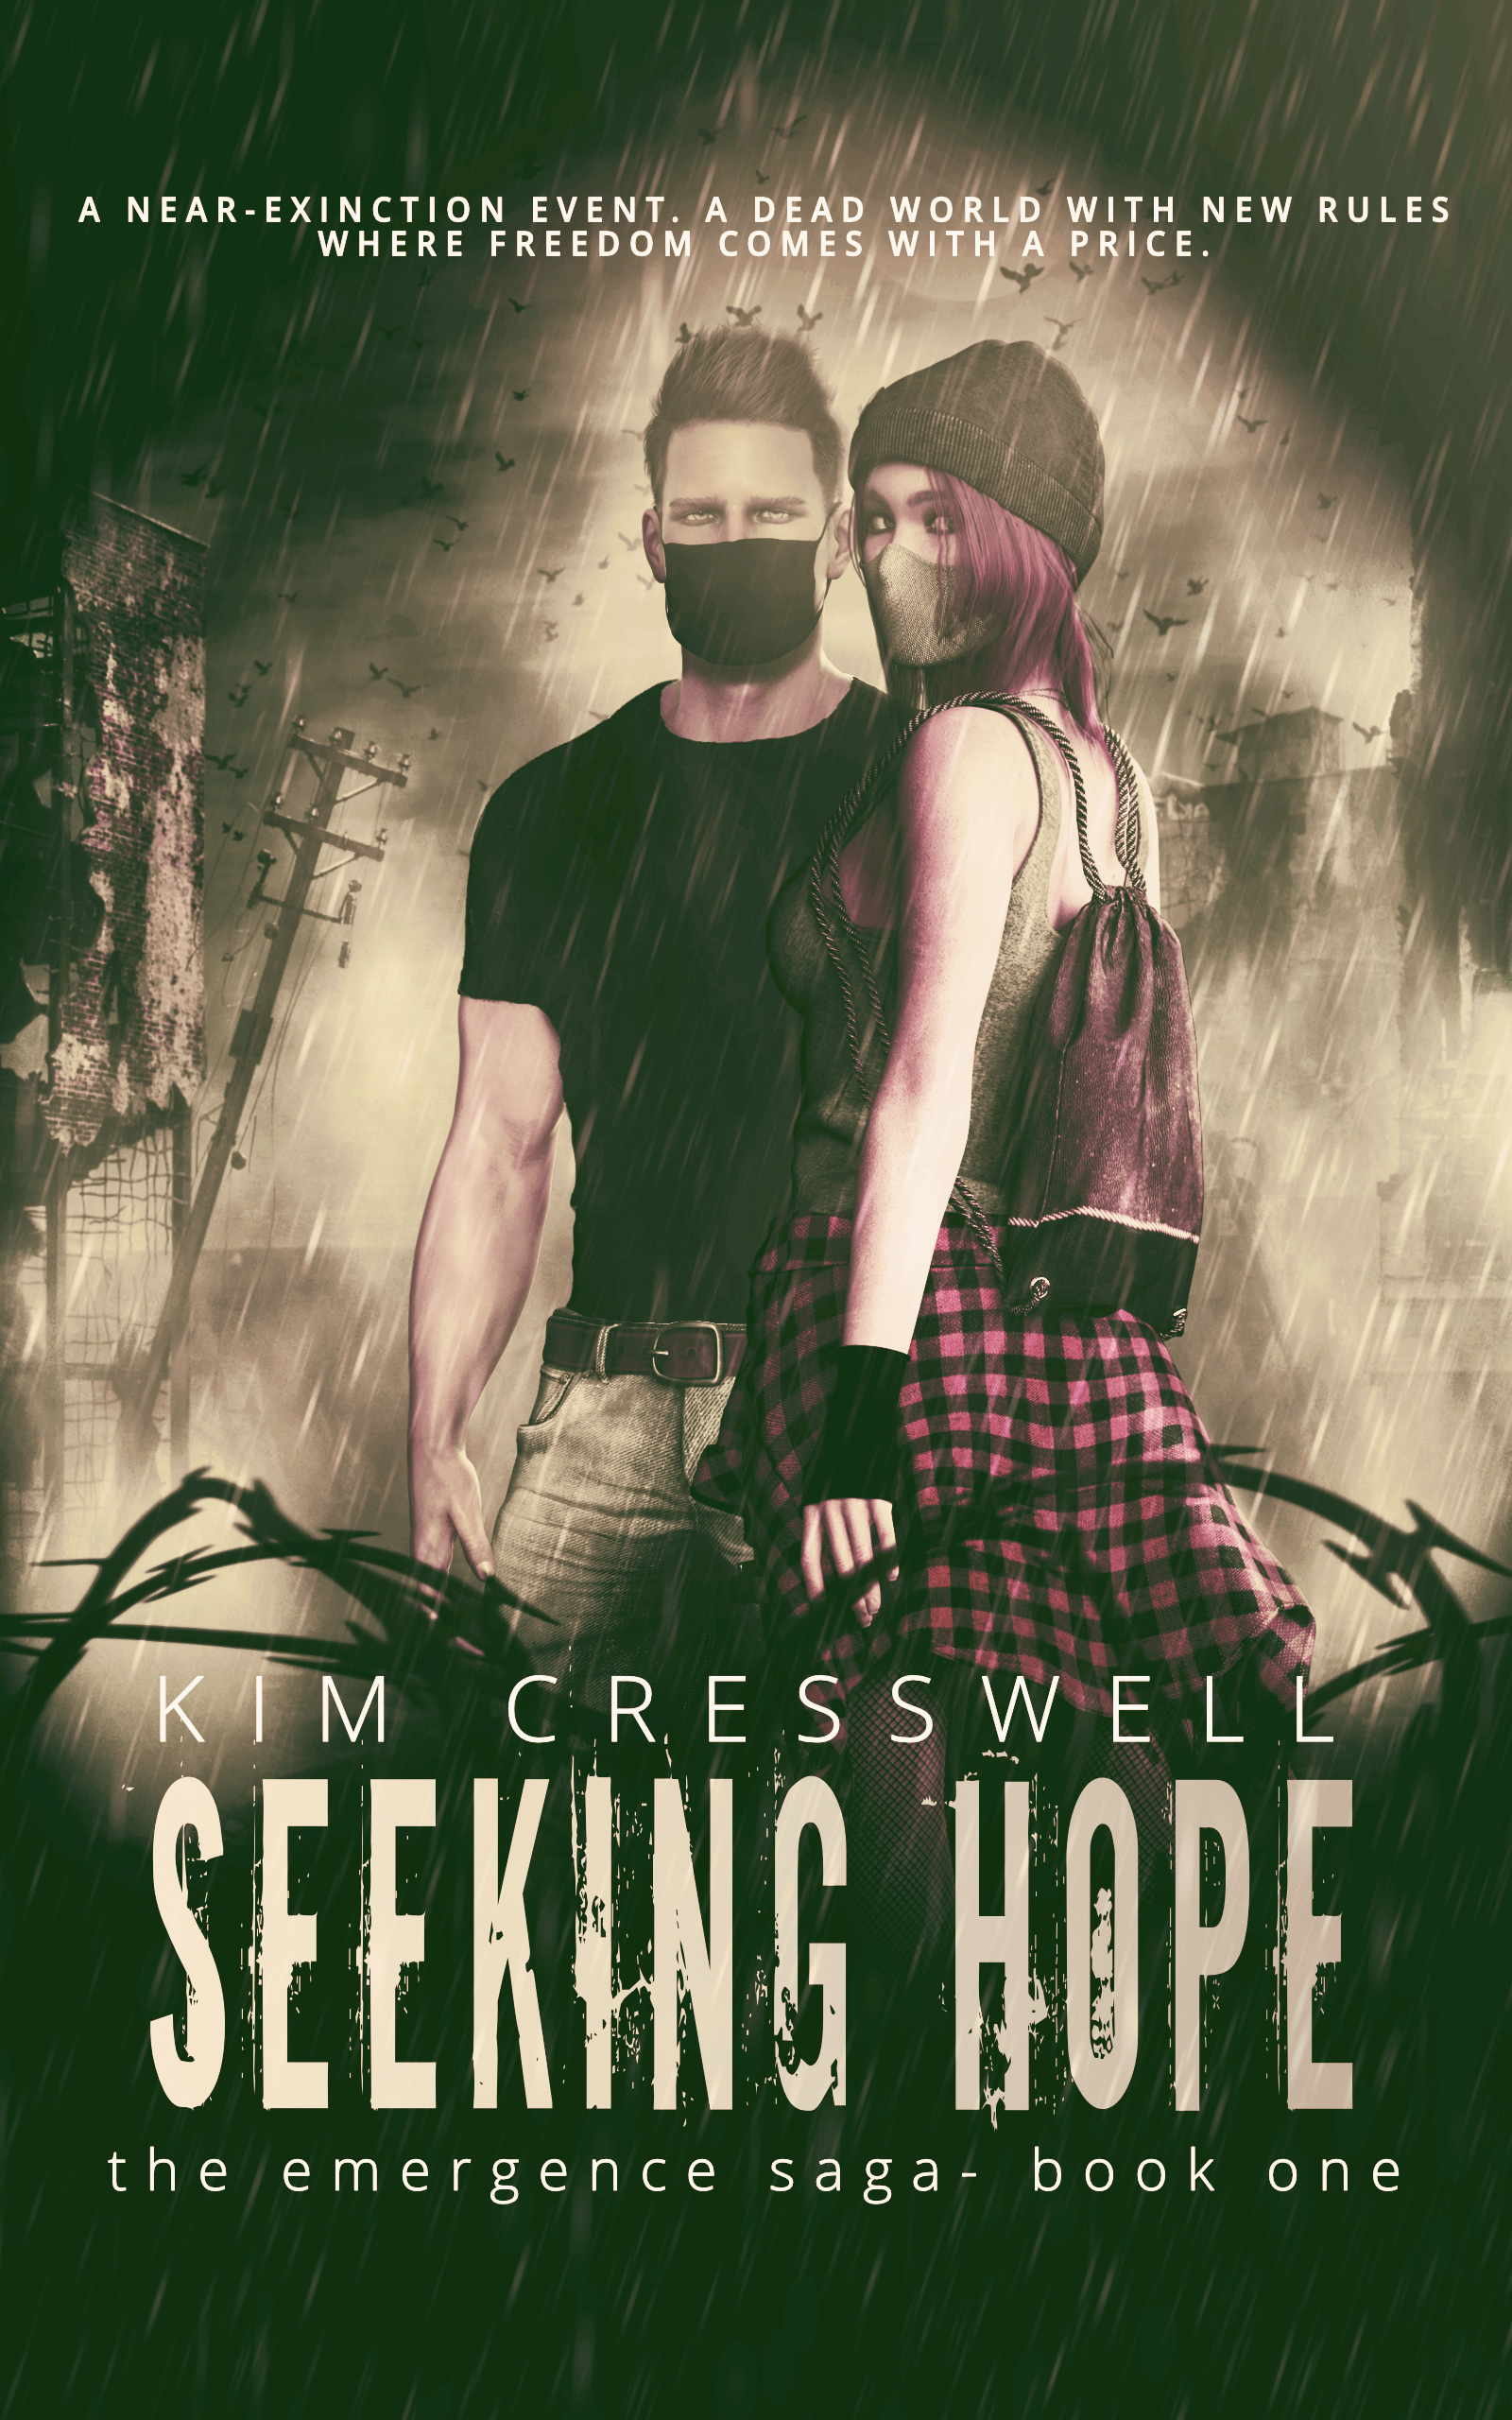 Cover Reveal! Coming Soon – Seeking Hope (The Emergence Saga)  #postapocalyptic #thriller #survivalfiction